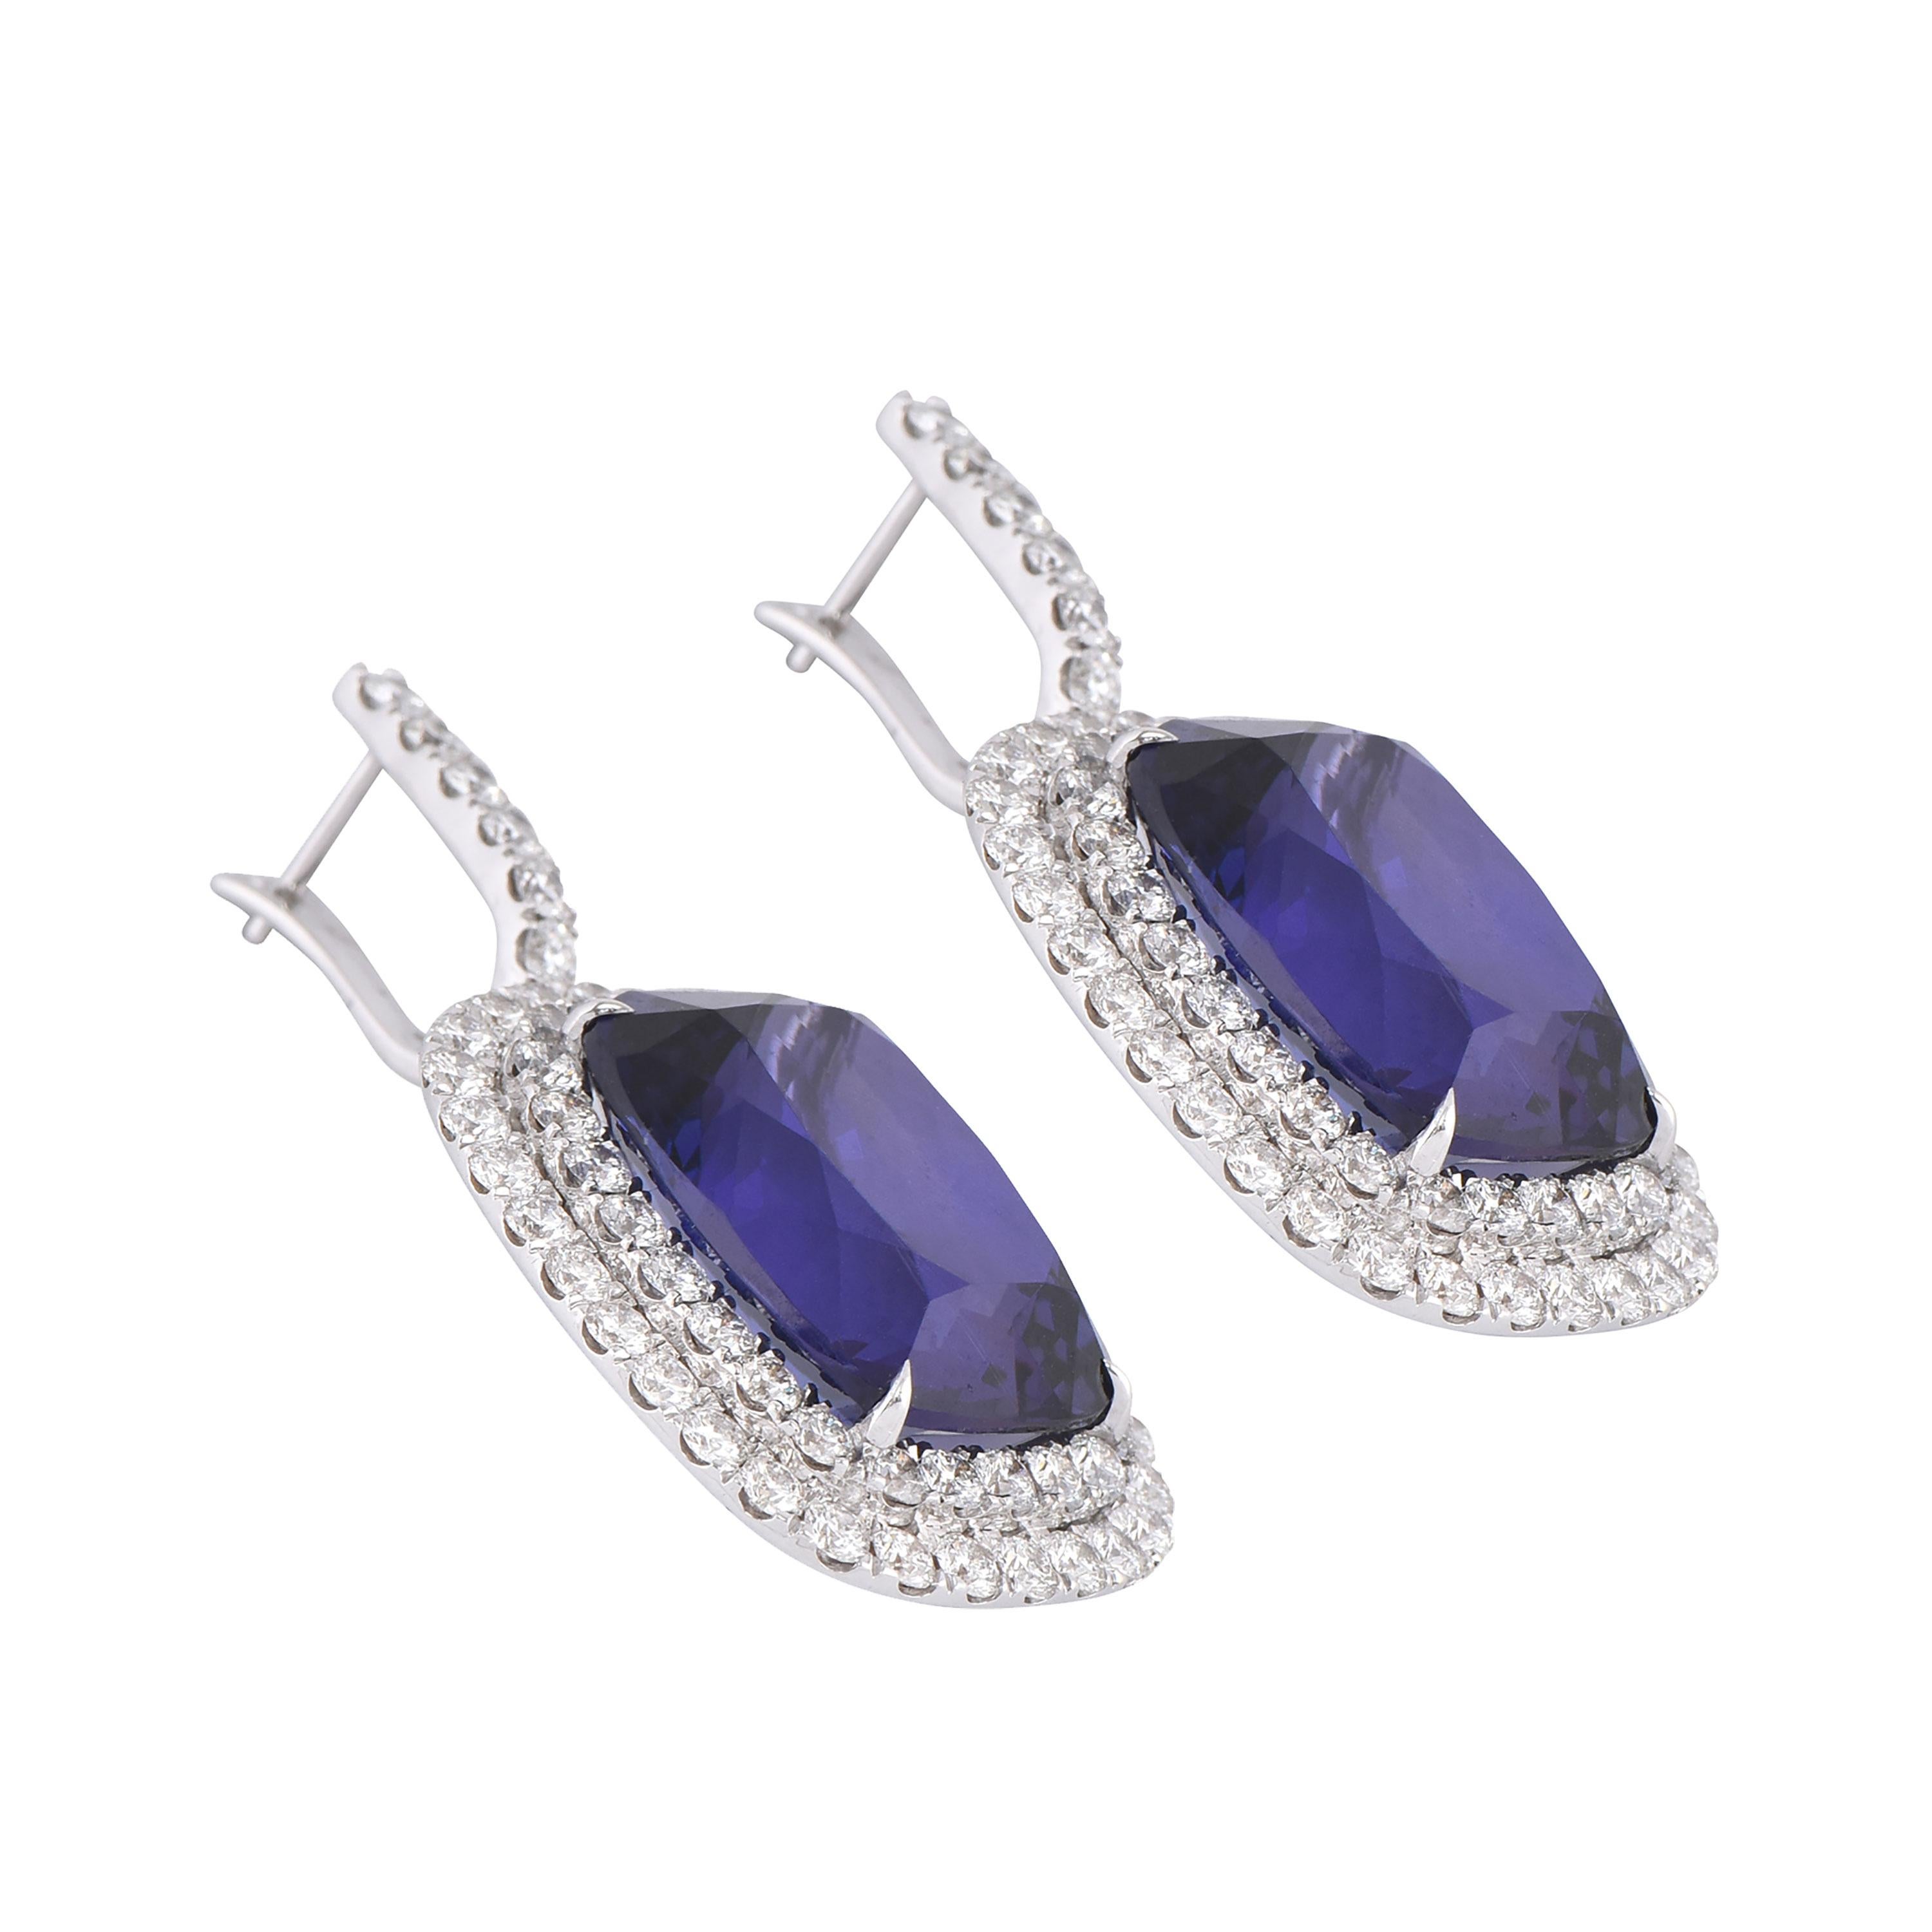 A pair 18 karat white gold dangle earrings from the Ultramarine collection of Laviere. The earrings, certified by IGI, are set with two cushion-cut Tanzanites weighing a total of 48.47 carats and round brilliant diamonds weighing a total of 6.39